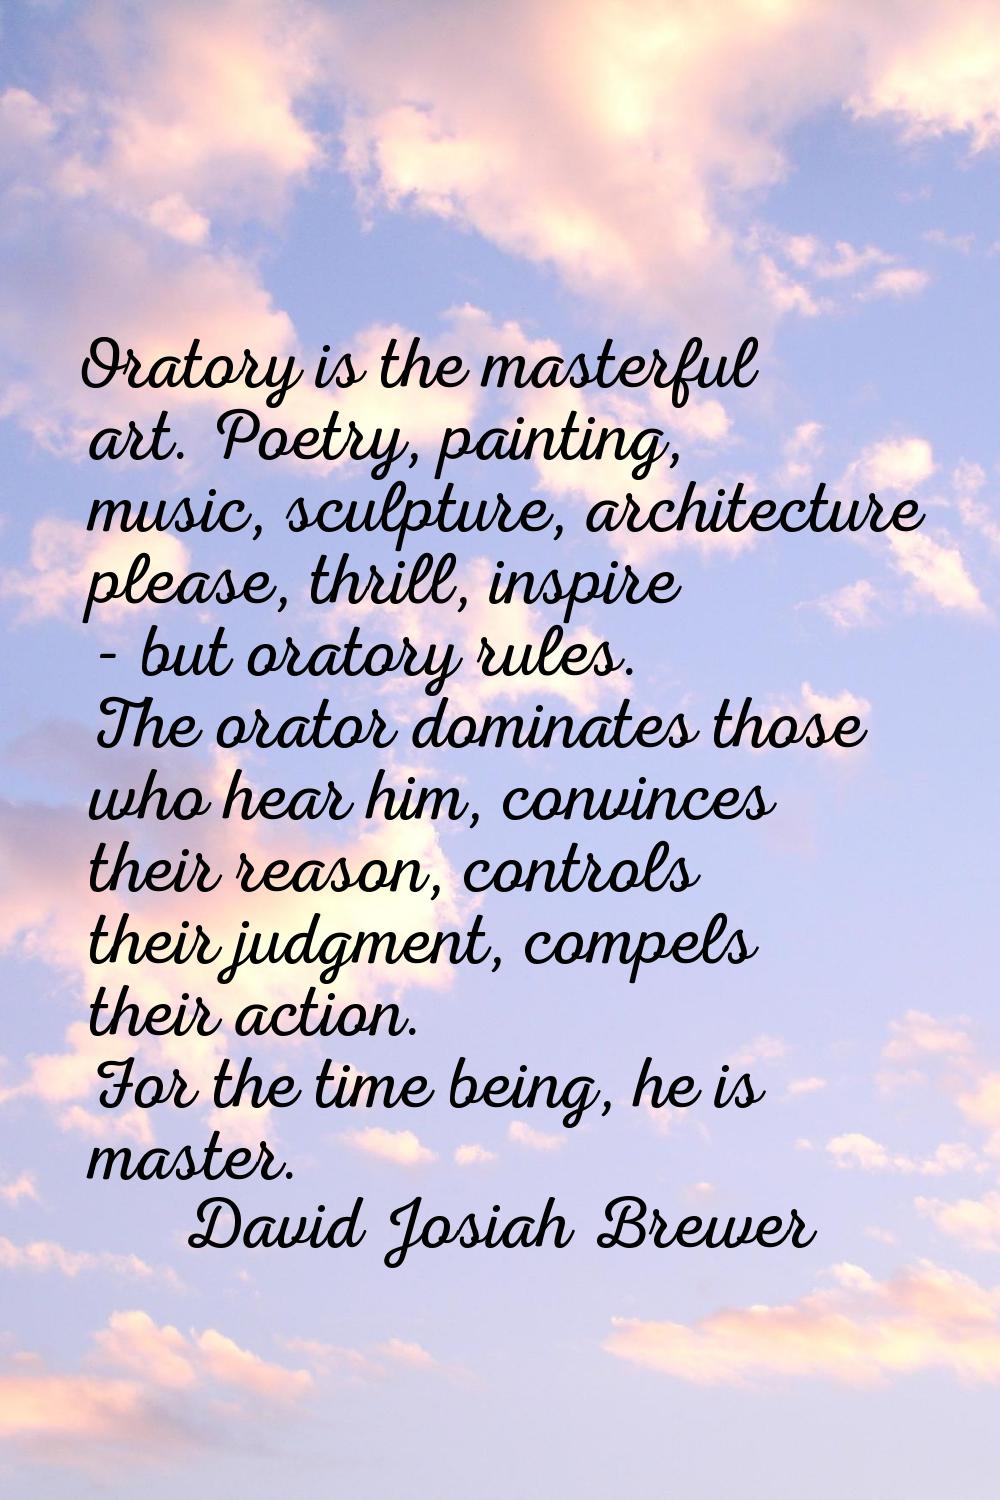 Oratory is the masterful art. Poetry, painting, music, sculpture, architecture please, thrill, insp